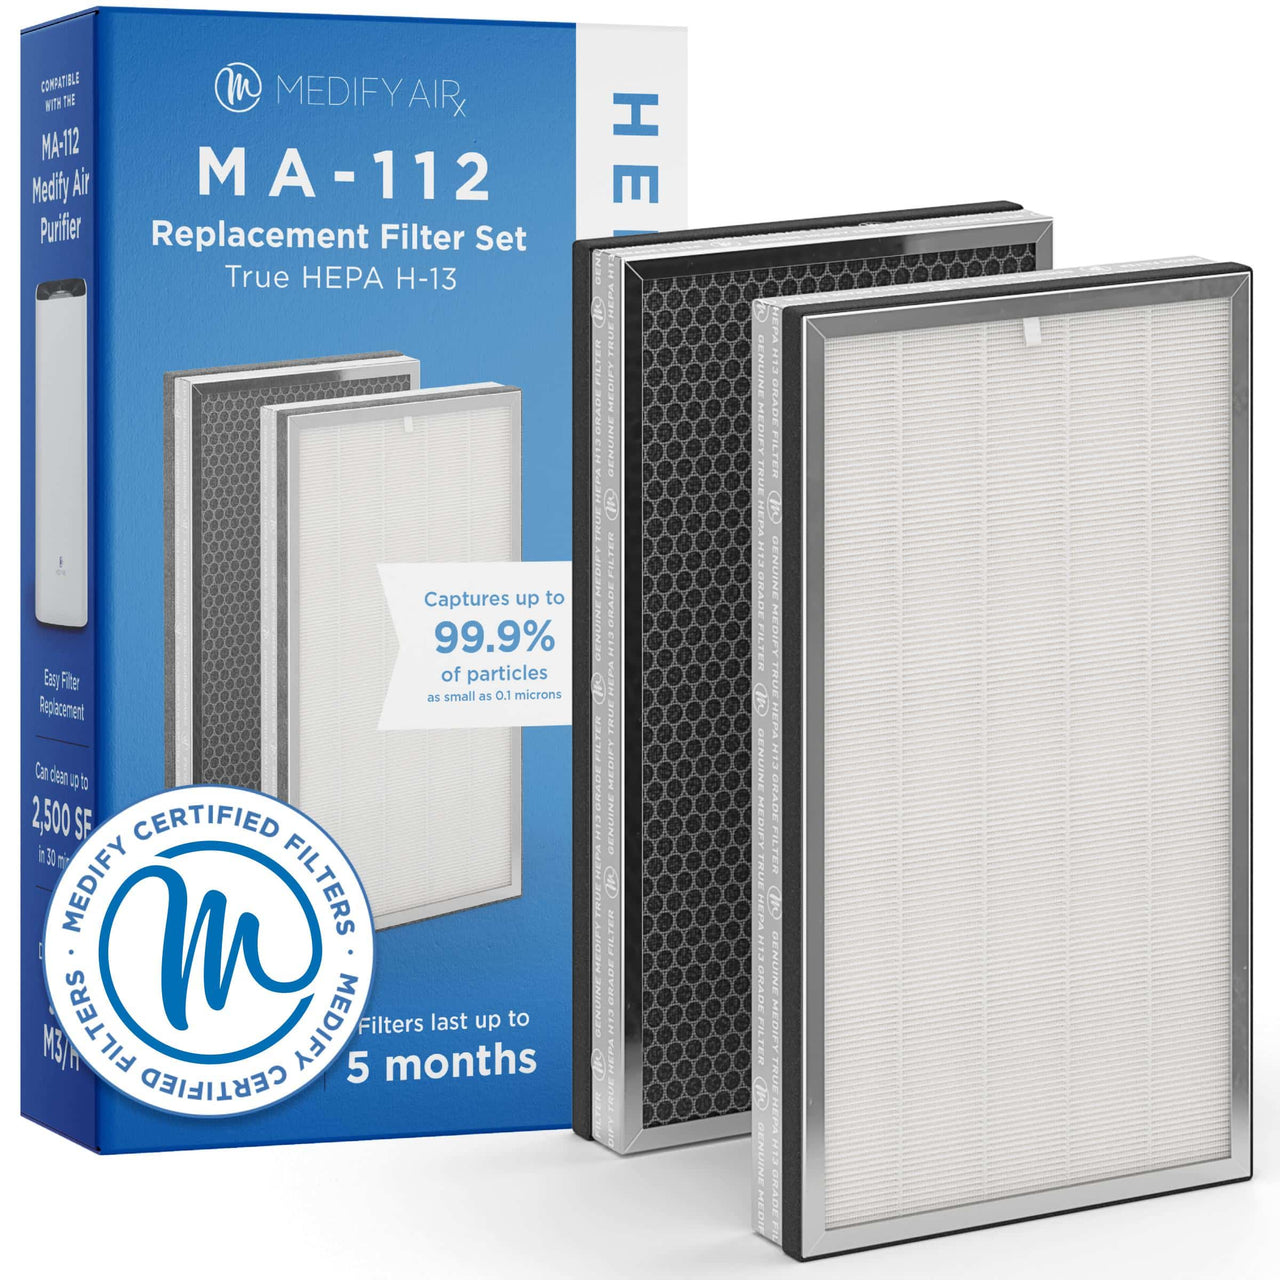 Medify Air MA-112 Replacement Filter